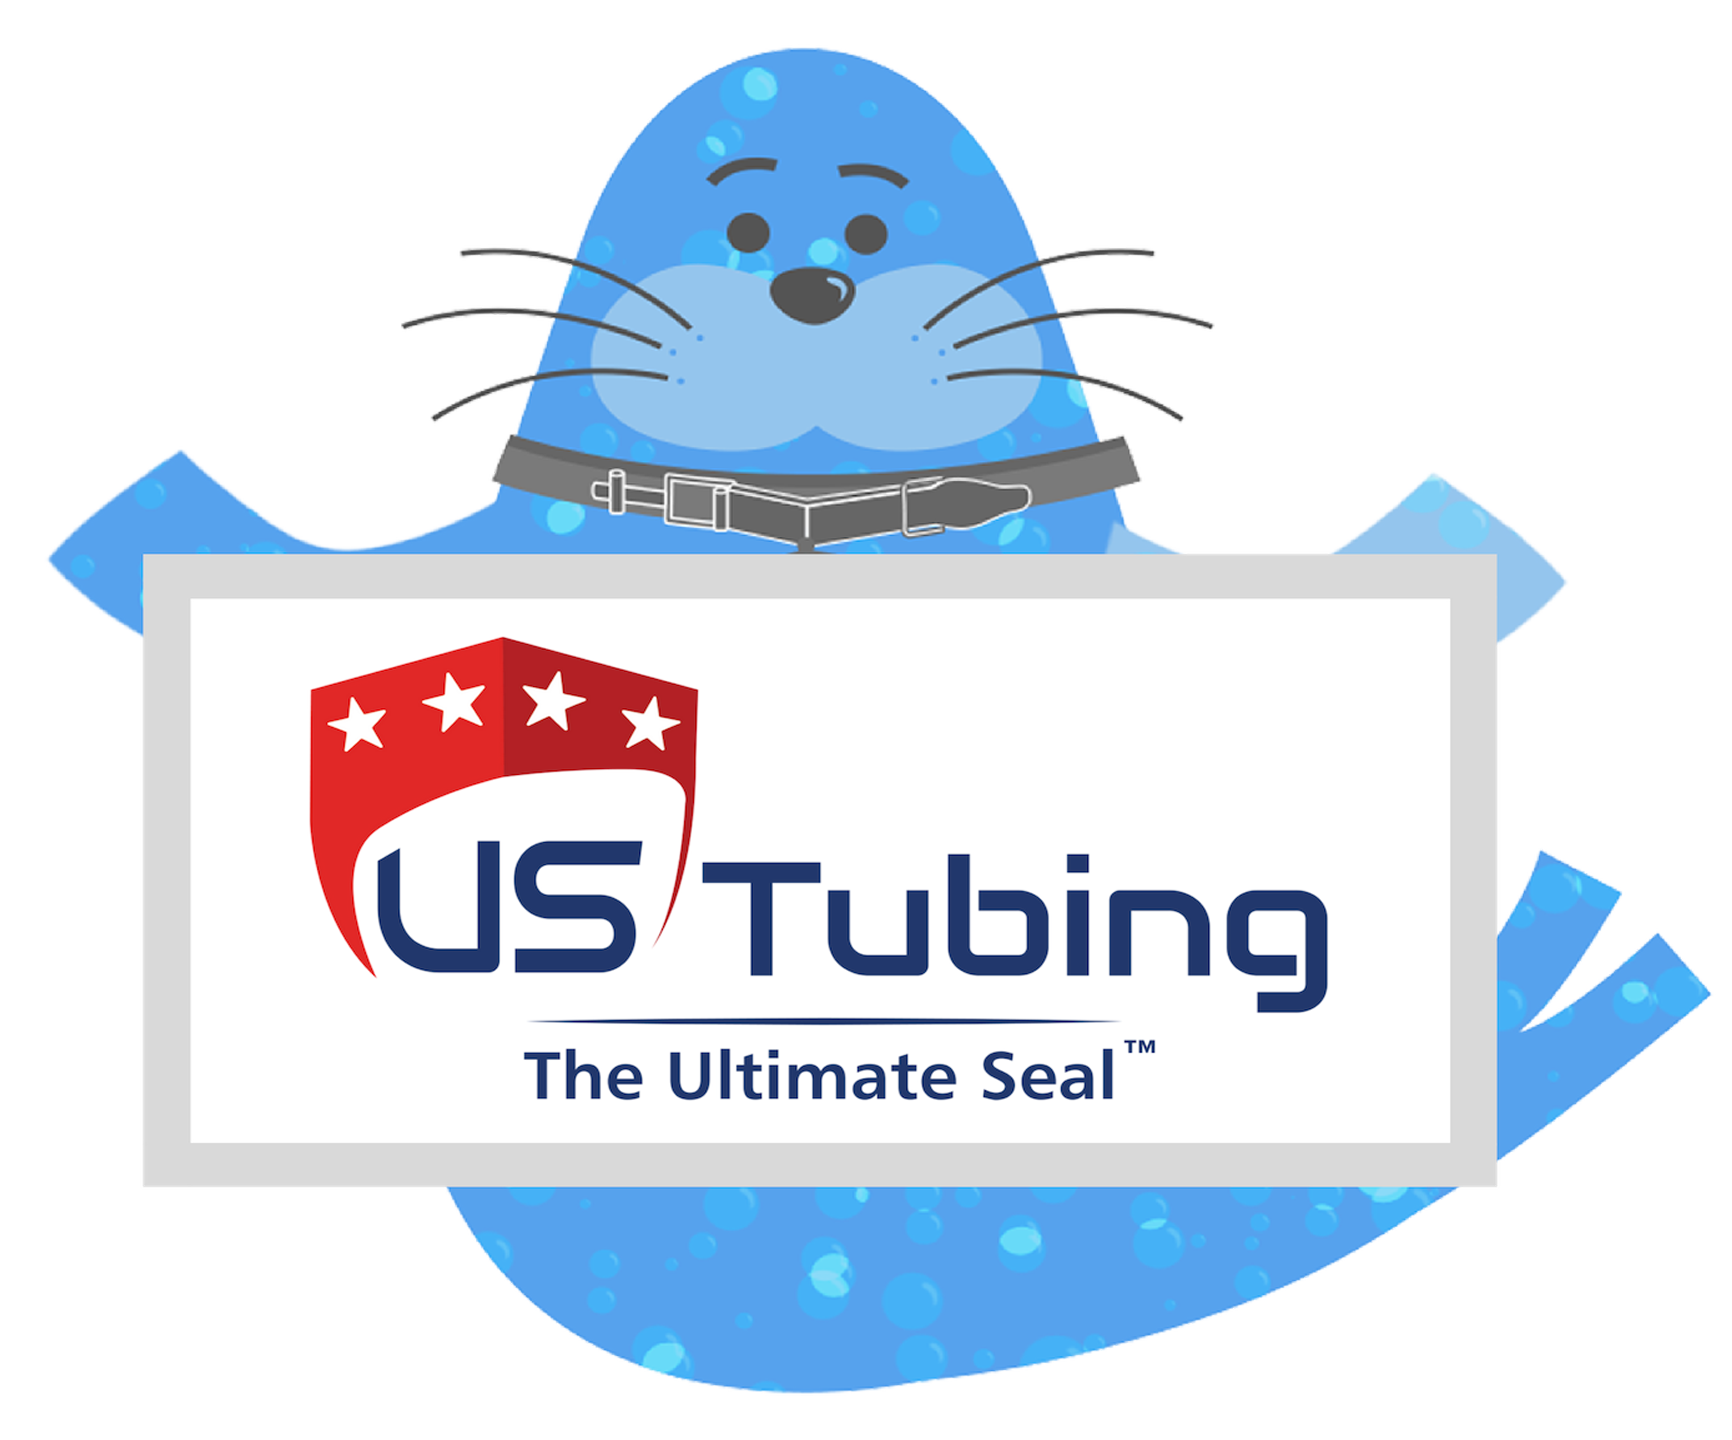 The Ultimate Seal of US Tubing